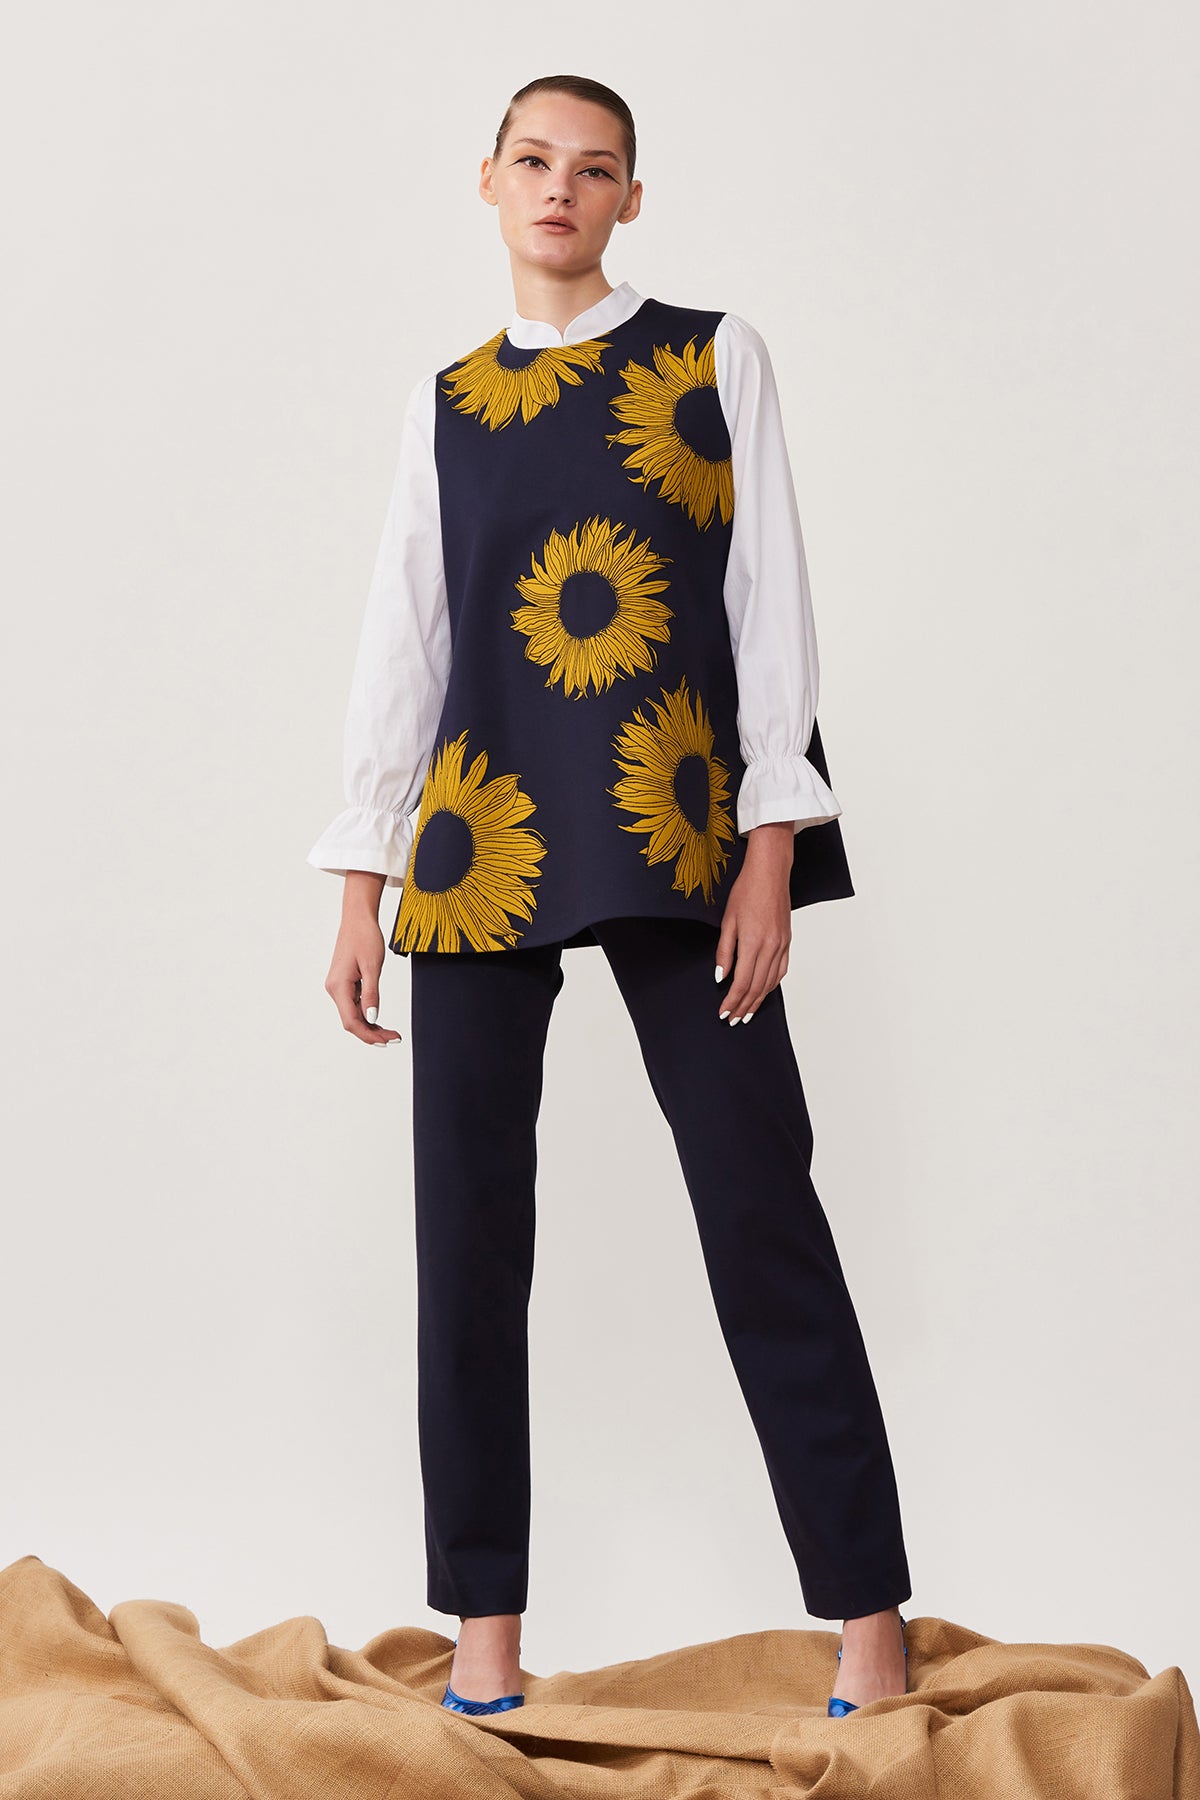 Straight Pant Of (Sunflower Flared Top)